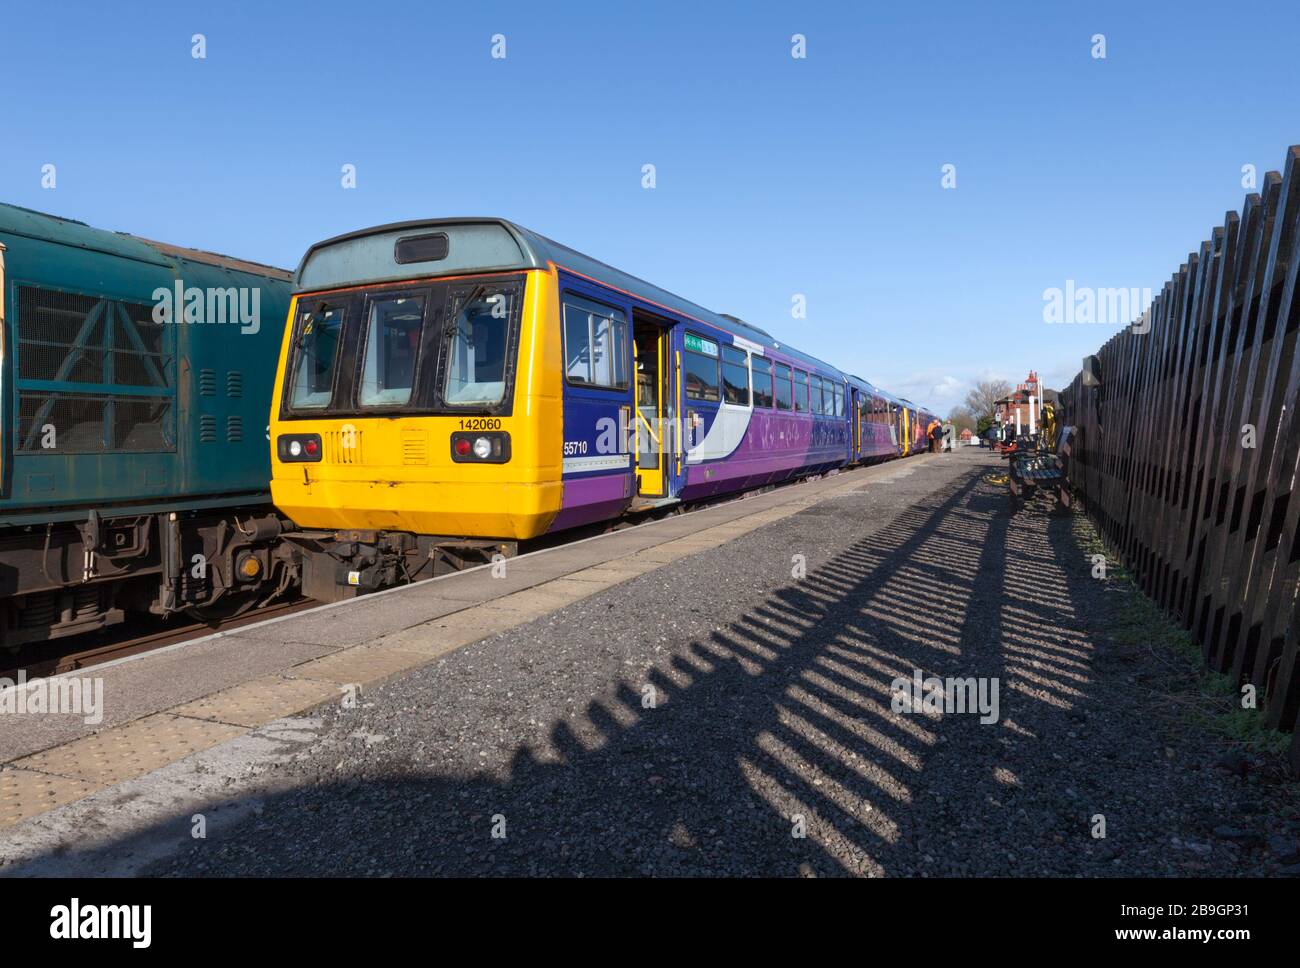 Former Northern rail class 142 pacer trains at 142060 + 142028at Leeming Bar on the Wensleydale railway on their first day running in preservation Stock Photo